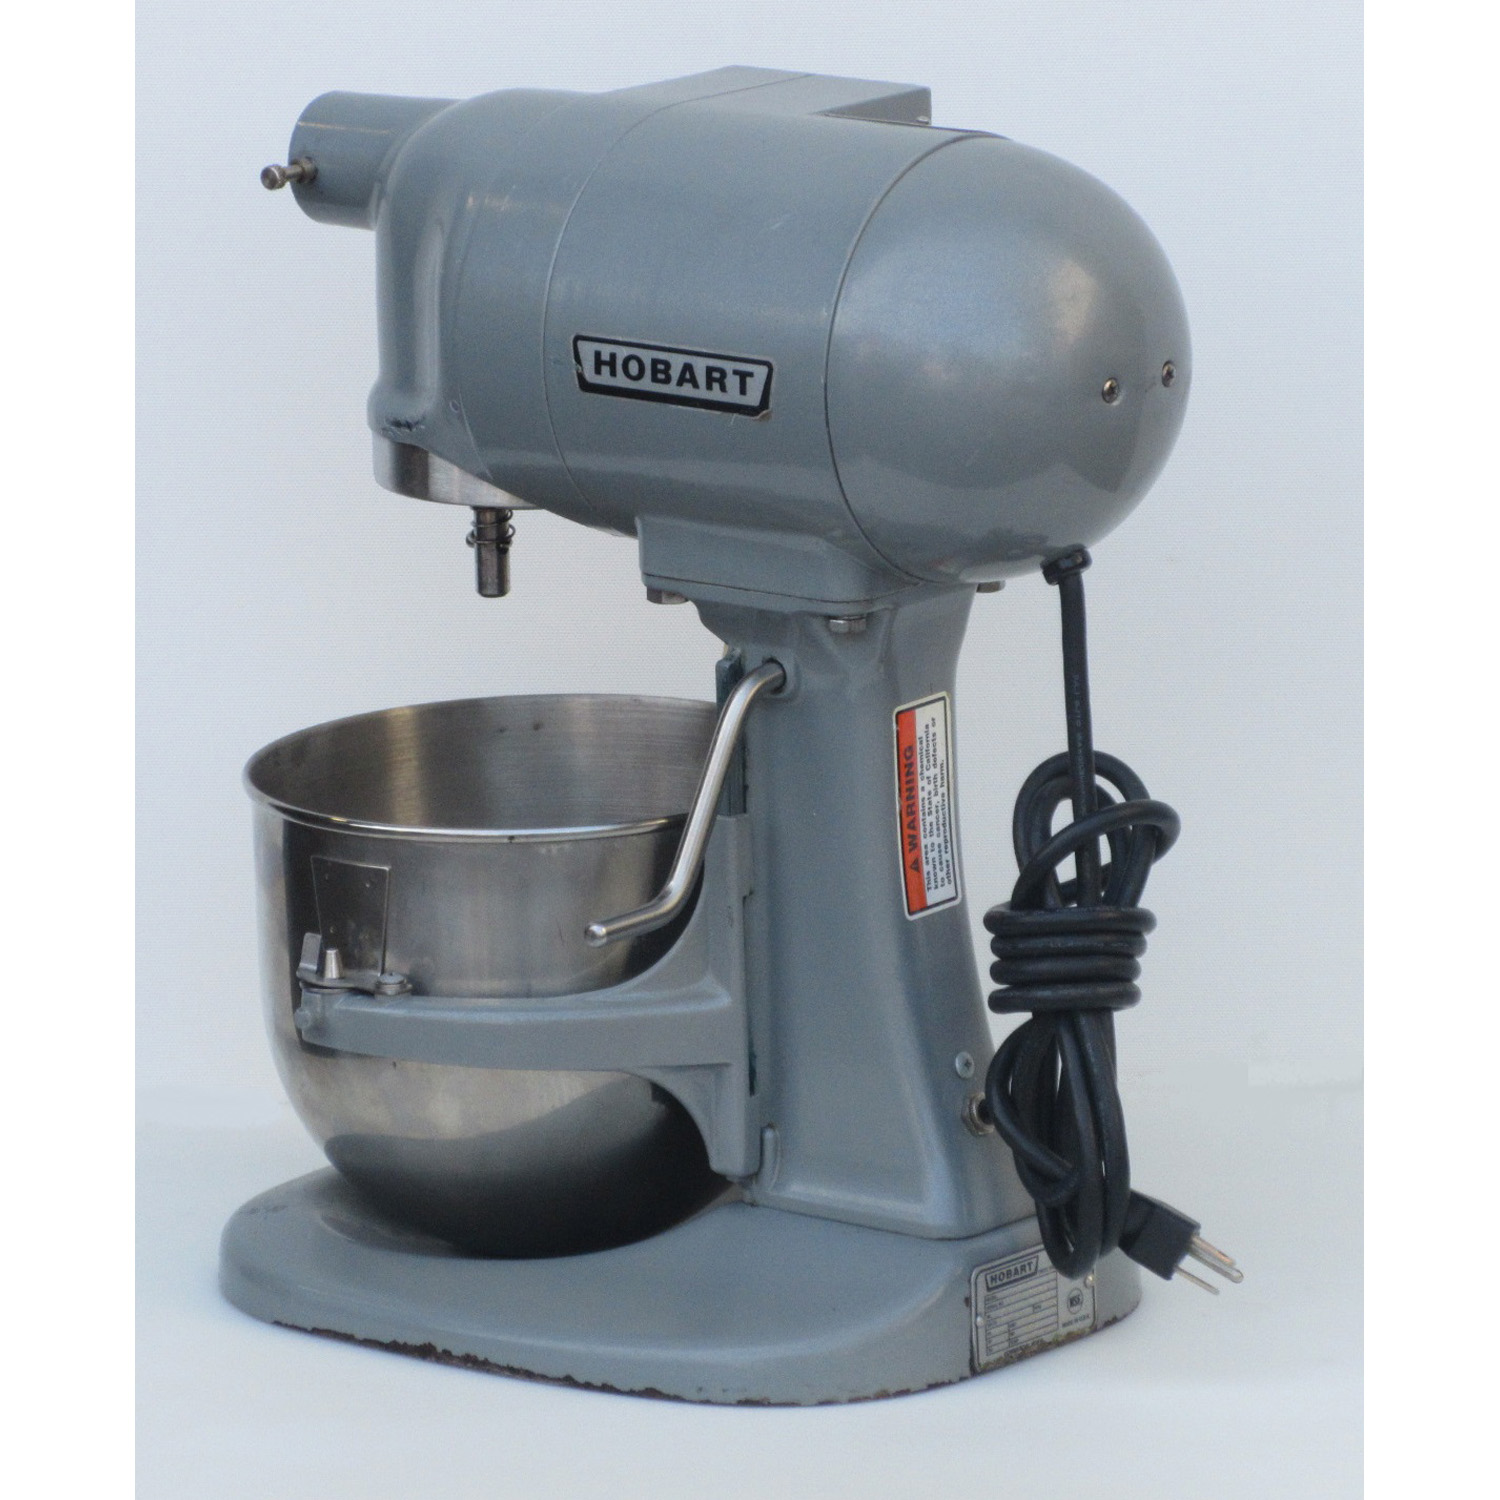 Hobart N50 5 Qt Mixer, Used Great Condition image 2